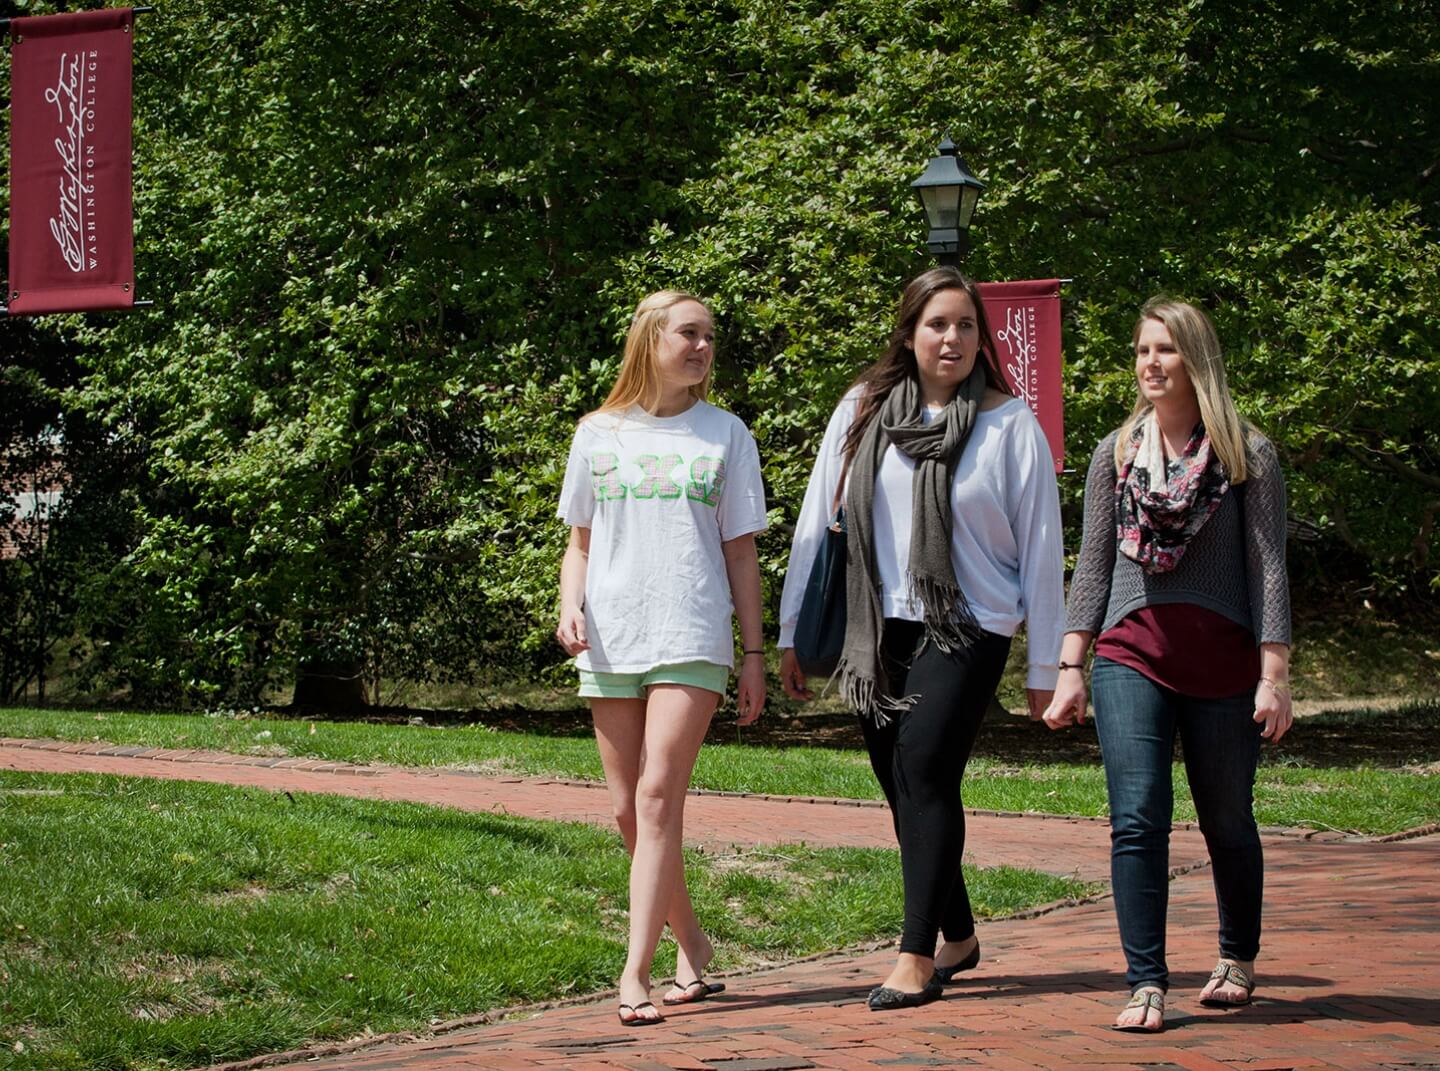 Three Washington College students walk along a brick-paved path on campus during a sunny spring day